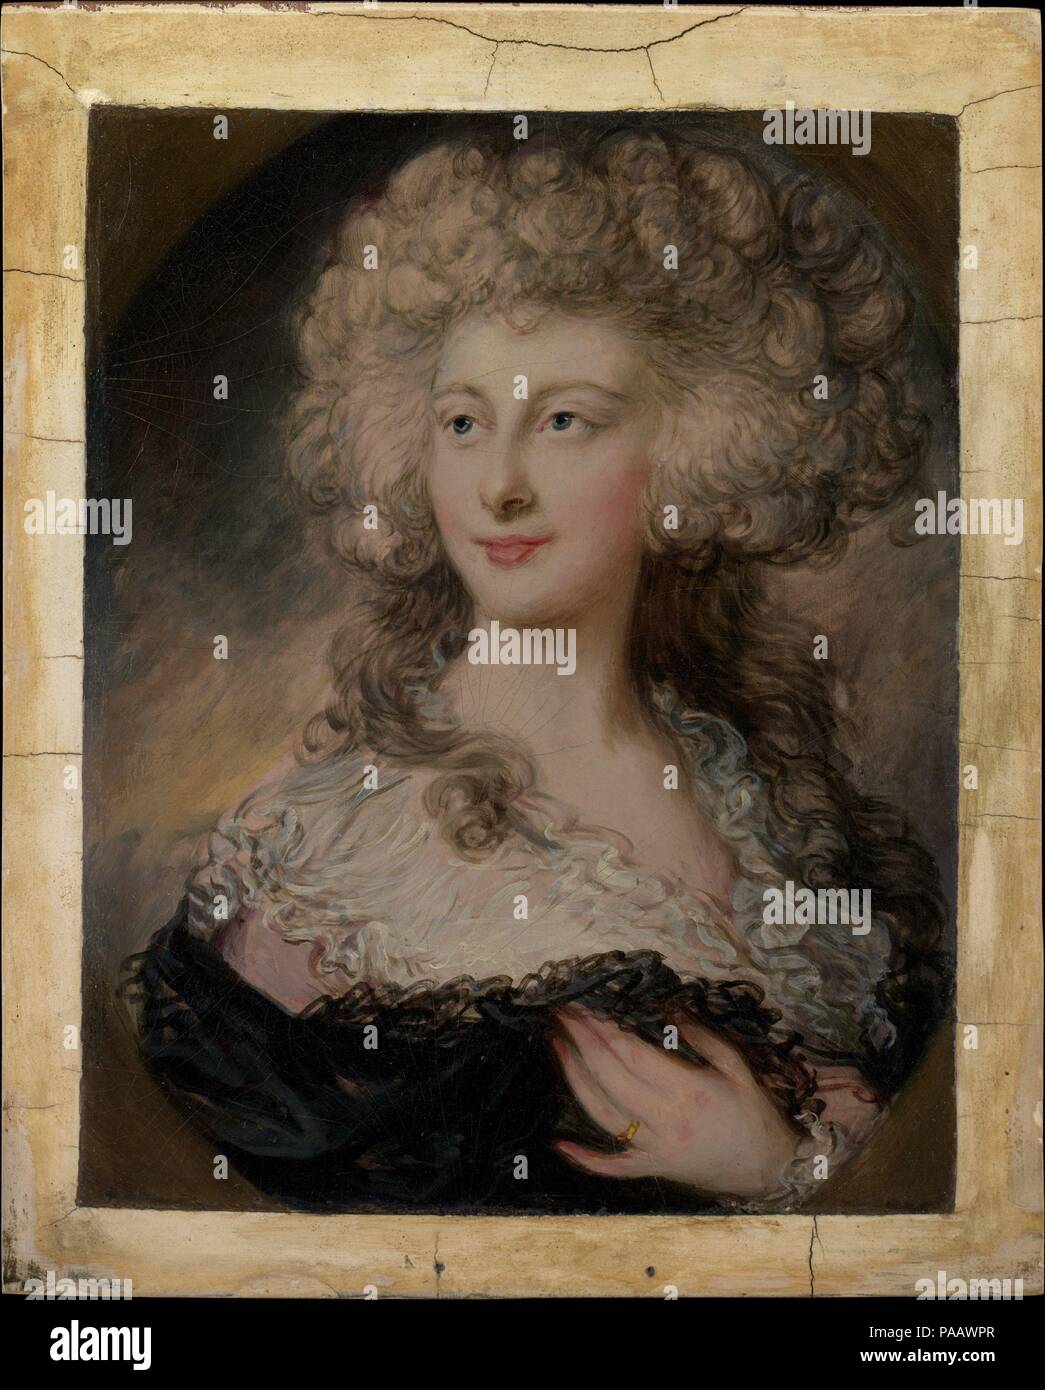 Anne Elizabeth Cholmley (1769-1788), Later Lady Mulgrave. Artist: Gainsborough Dupont (British, Sudbury, Suffolk 1754-1797 London). Dimensions: Overall 7 1/8 x 5 3/4 in. (18.1 x 14.6 cm); painted surface 6 x 4 3/4 in. (15.2 x 12.1 cm). Museum: Metropolitan Museum of Art, New York, USA. Stock Photo